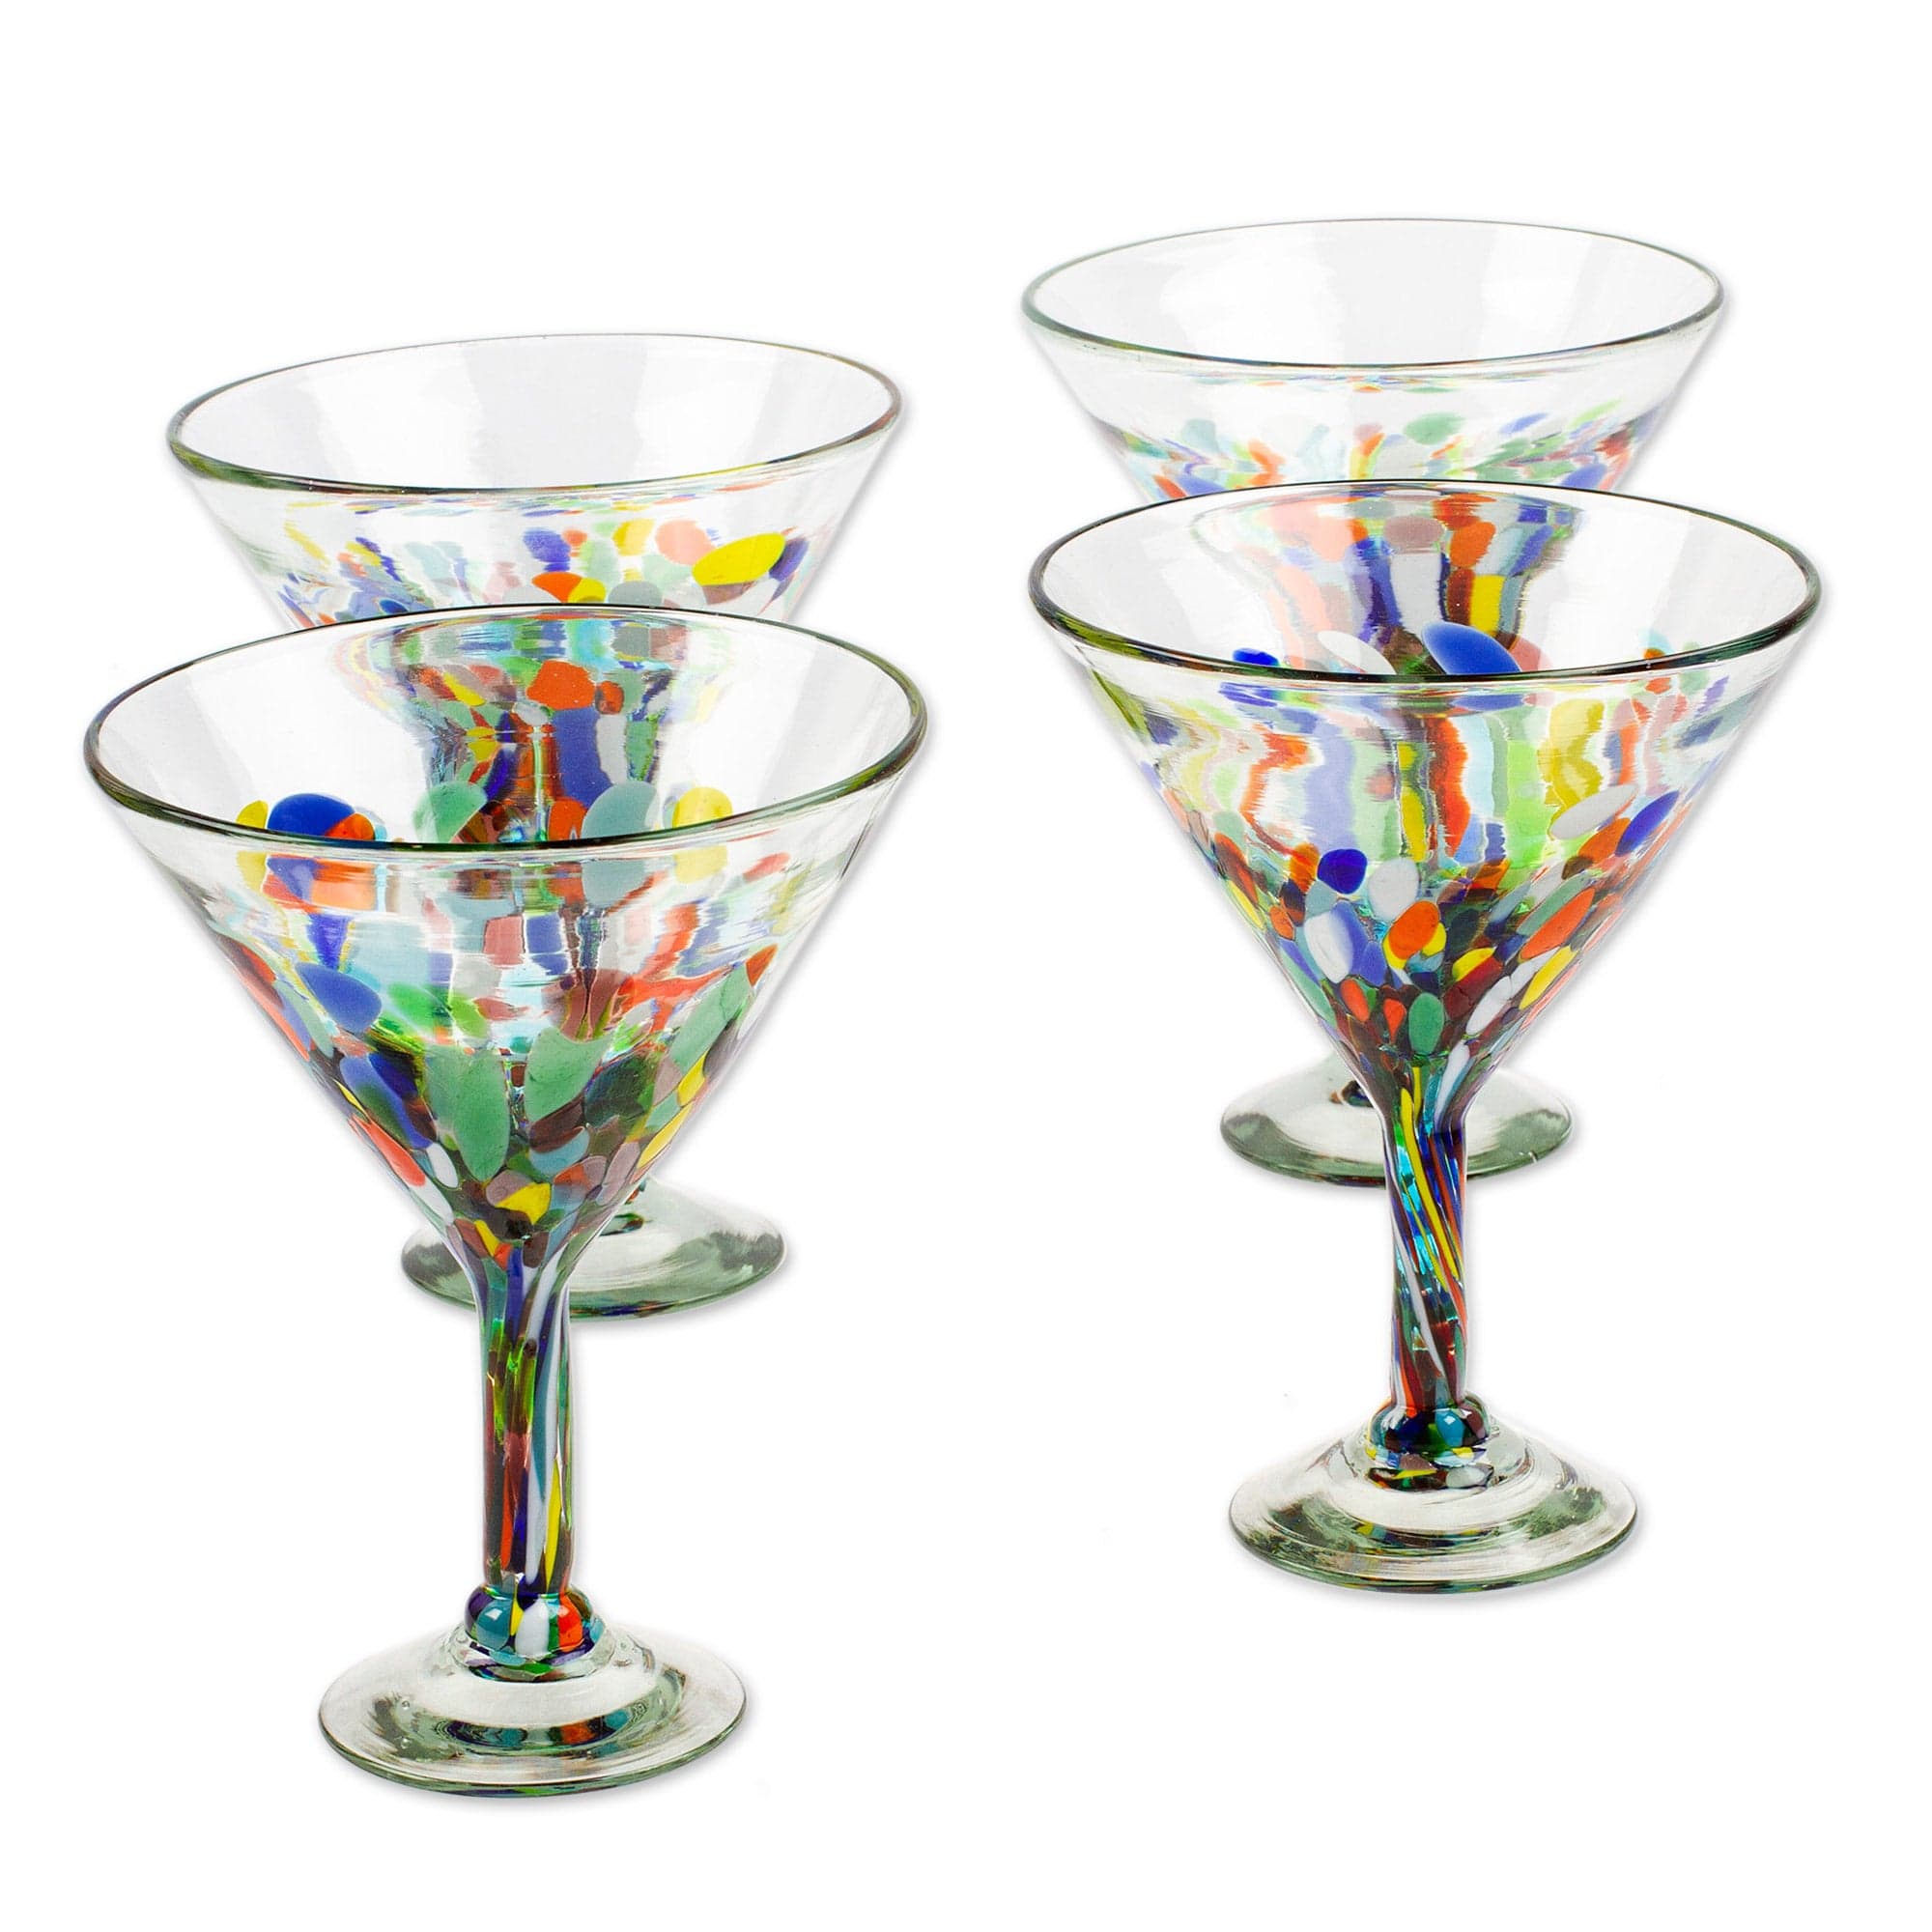 Set of 4 Clear Handblown Martini Glasses from Mexico - Ethereal Glamou –  GlobeIn